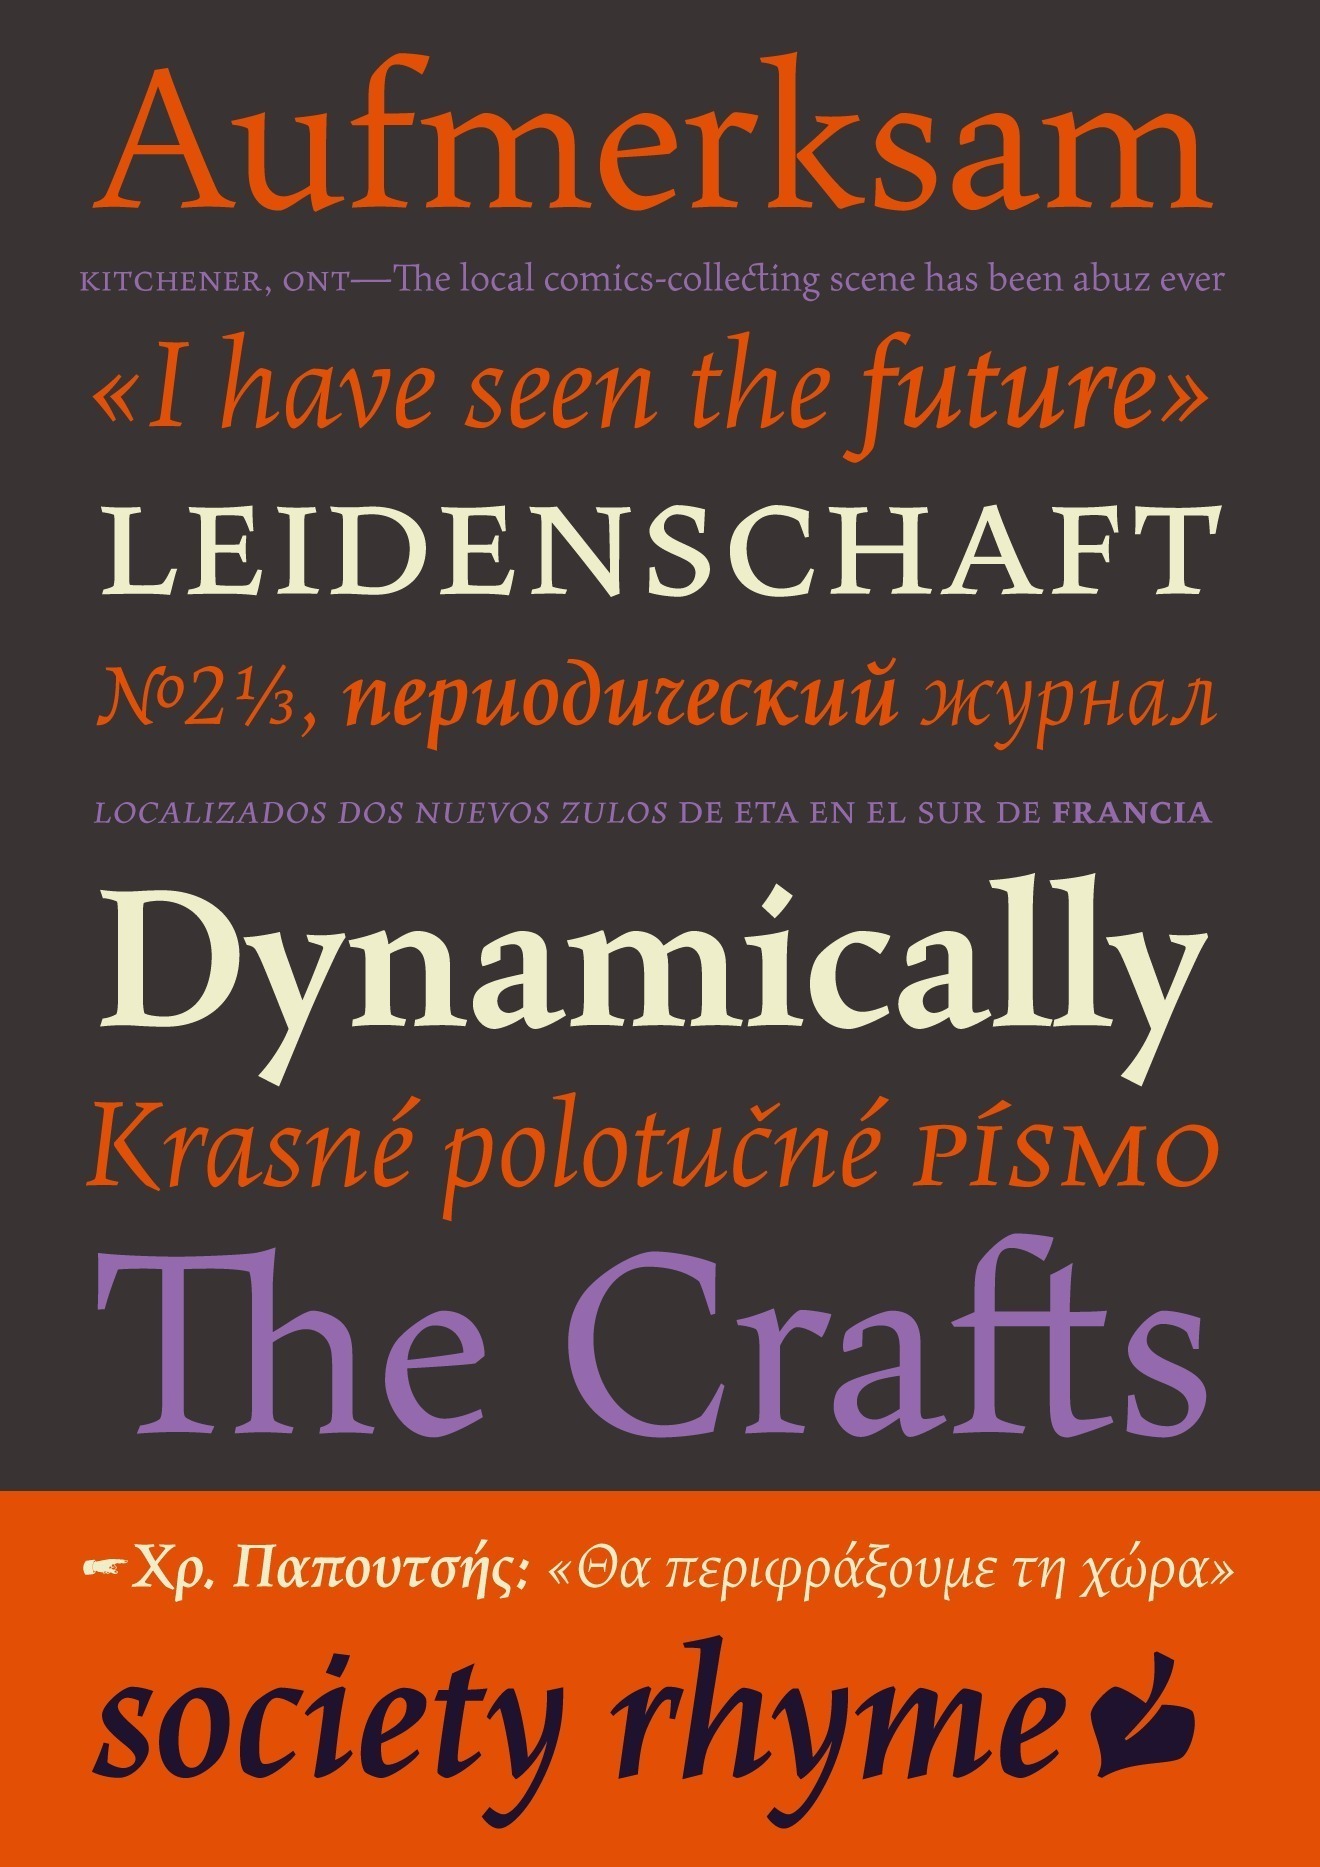 Originally released through FontFont in 2005, Veronika’s first typeface Maiola was an immediate success. It won the renowned TDC competition in 2004 where it was also recognized as a “judge’s choice”, was part of the touring exhibition e-a-t, and was selected in the Creative Review design competition in 2005, and won the Granshan competition 2008 in the Cyrillic category. Maiola was expanded with the Cyrillic and Greek script, plus several new or improved glyphs –  new ornaments, stylistic alternates, ligatures, superior letters, fractions and more.